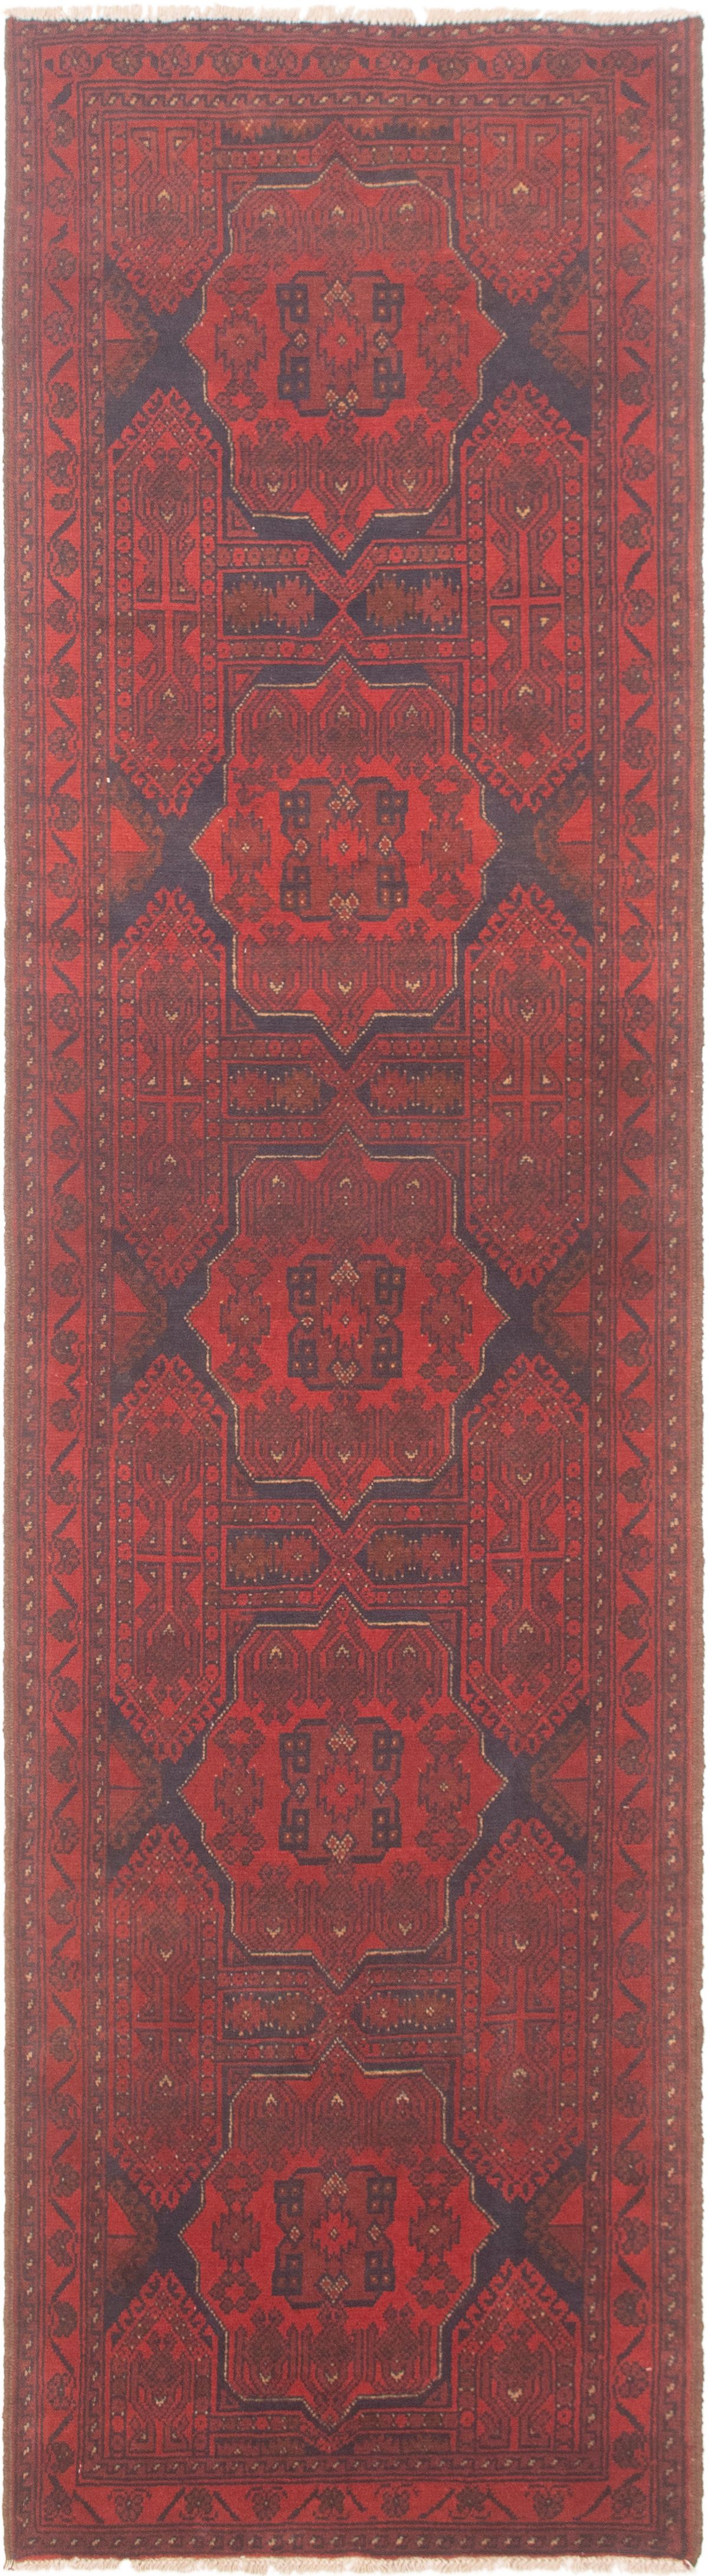 Hand-knotted Finest Khal Mohammadi Red Wool Rug 2'6" x 9'10"  Size: 2'6" x 9'10"  